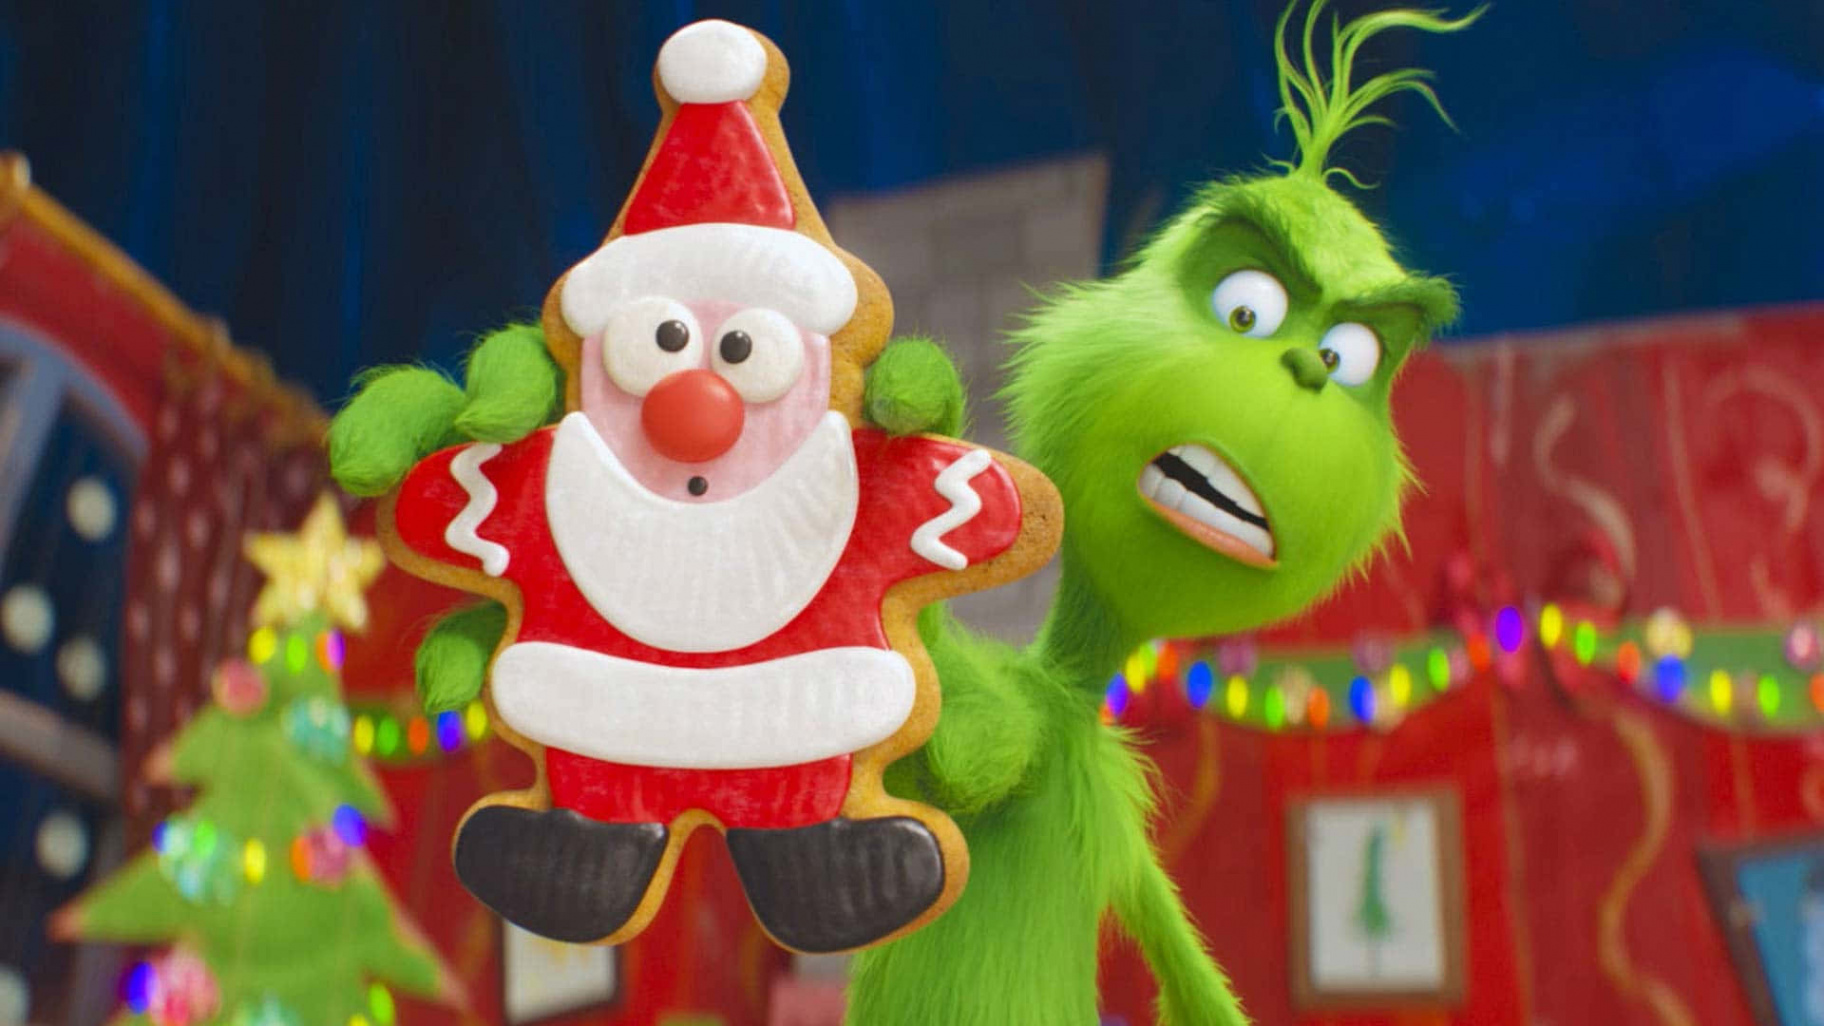 Download The Grinch In The Christmas Spirit  Wallpapers